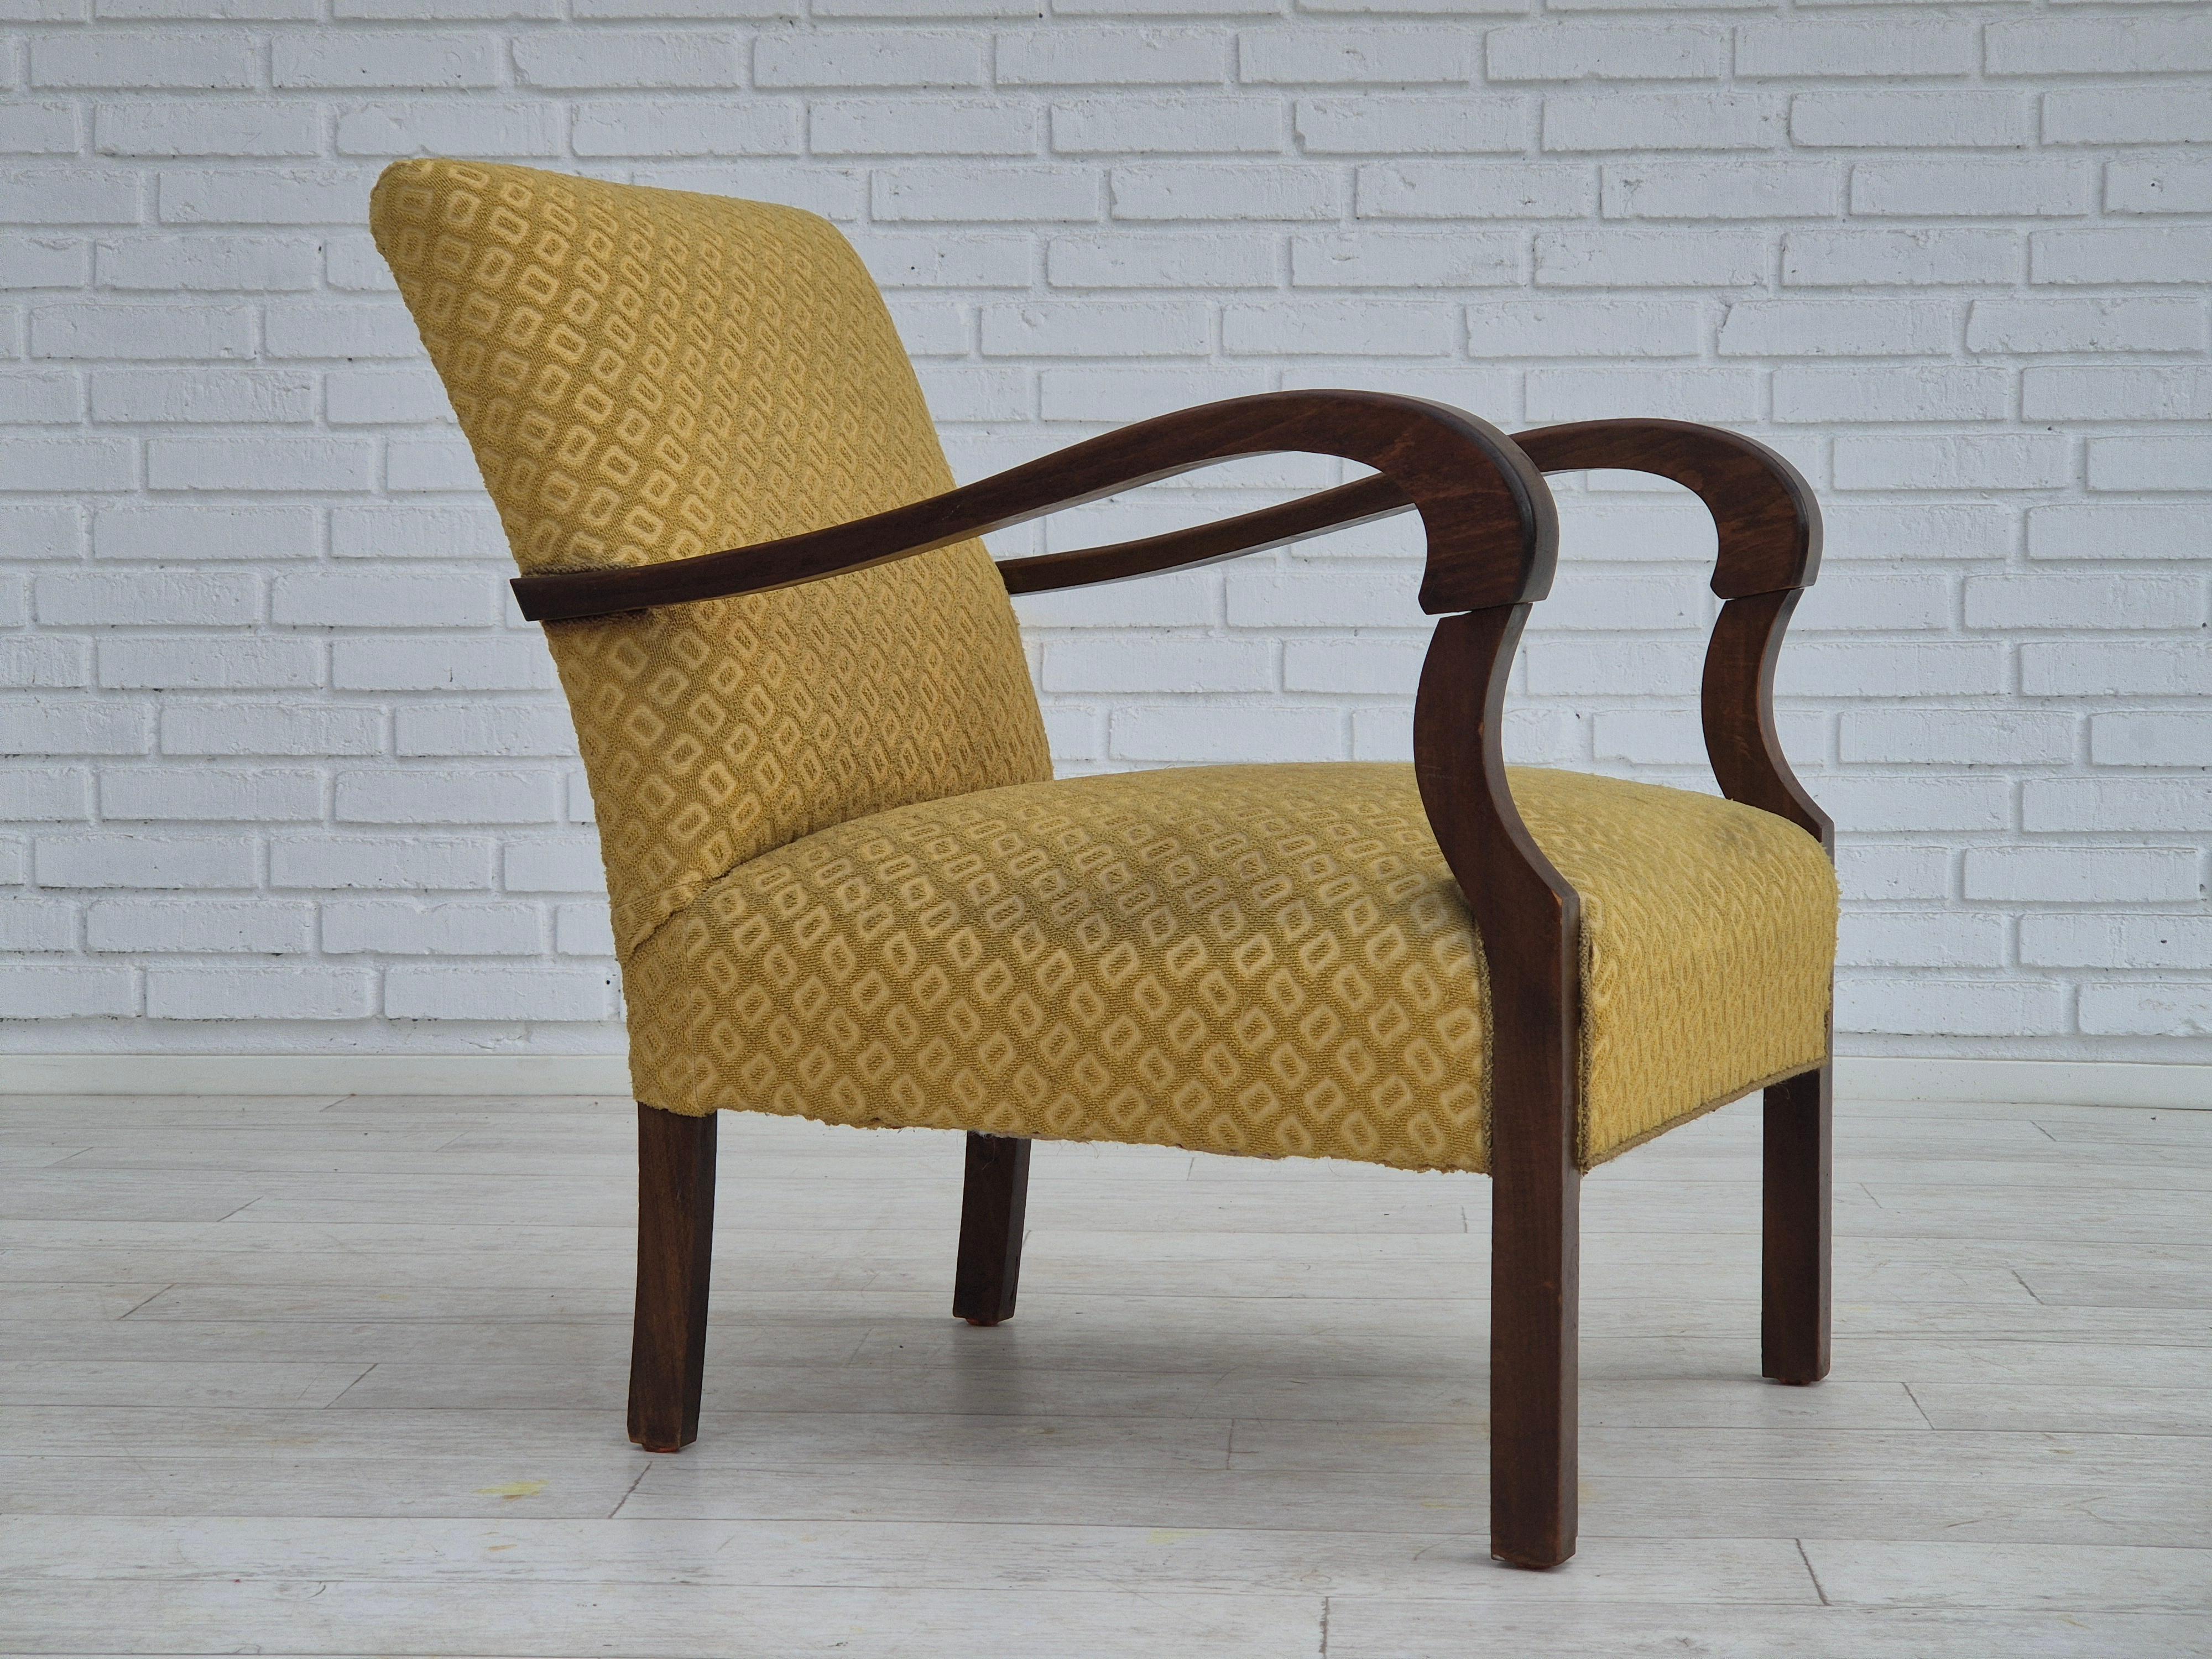 1950s, Danish design. Armchair in original, very good condition: no smells and no stains. Yellow furniture cotton/ wool fabric. Beech wood legs and armrests, brass springs in the seat. Manufactured by Danish furniture manufacturer in about 1950-55s.